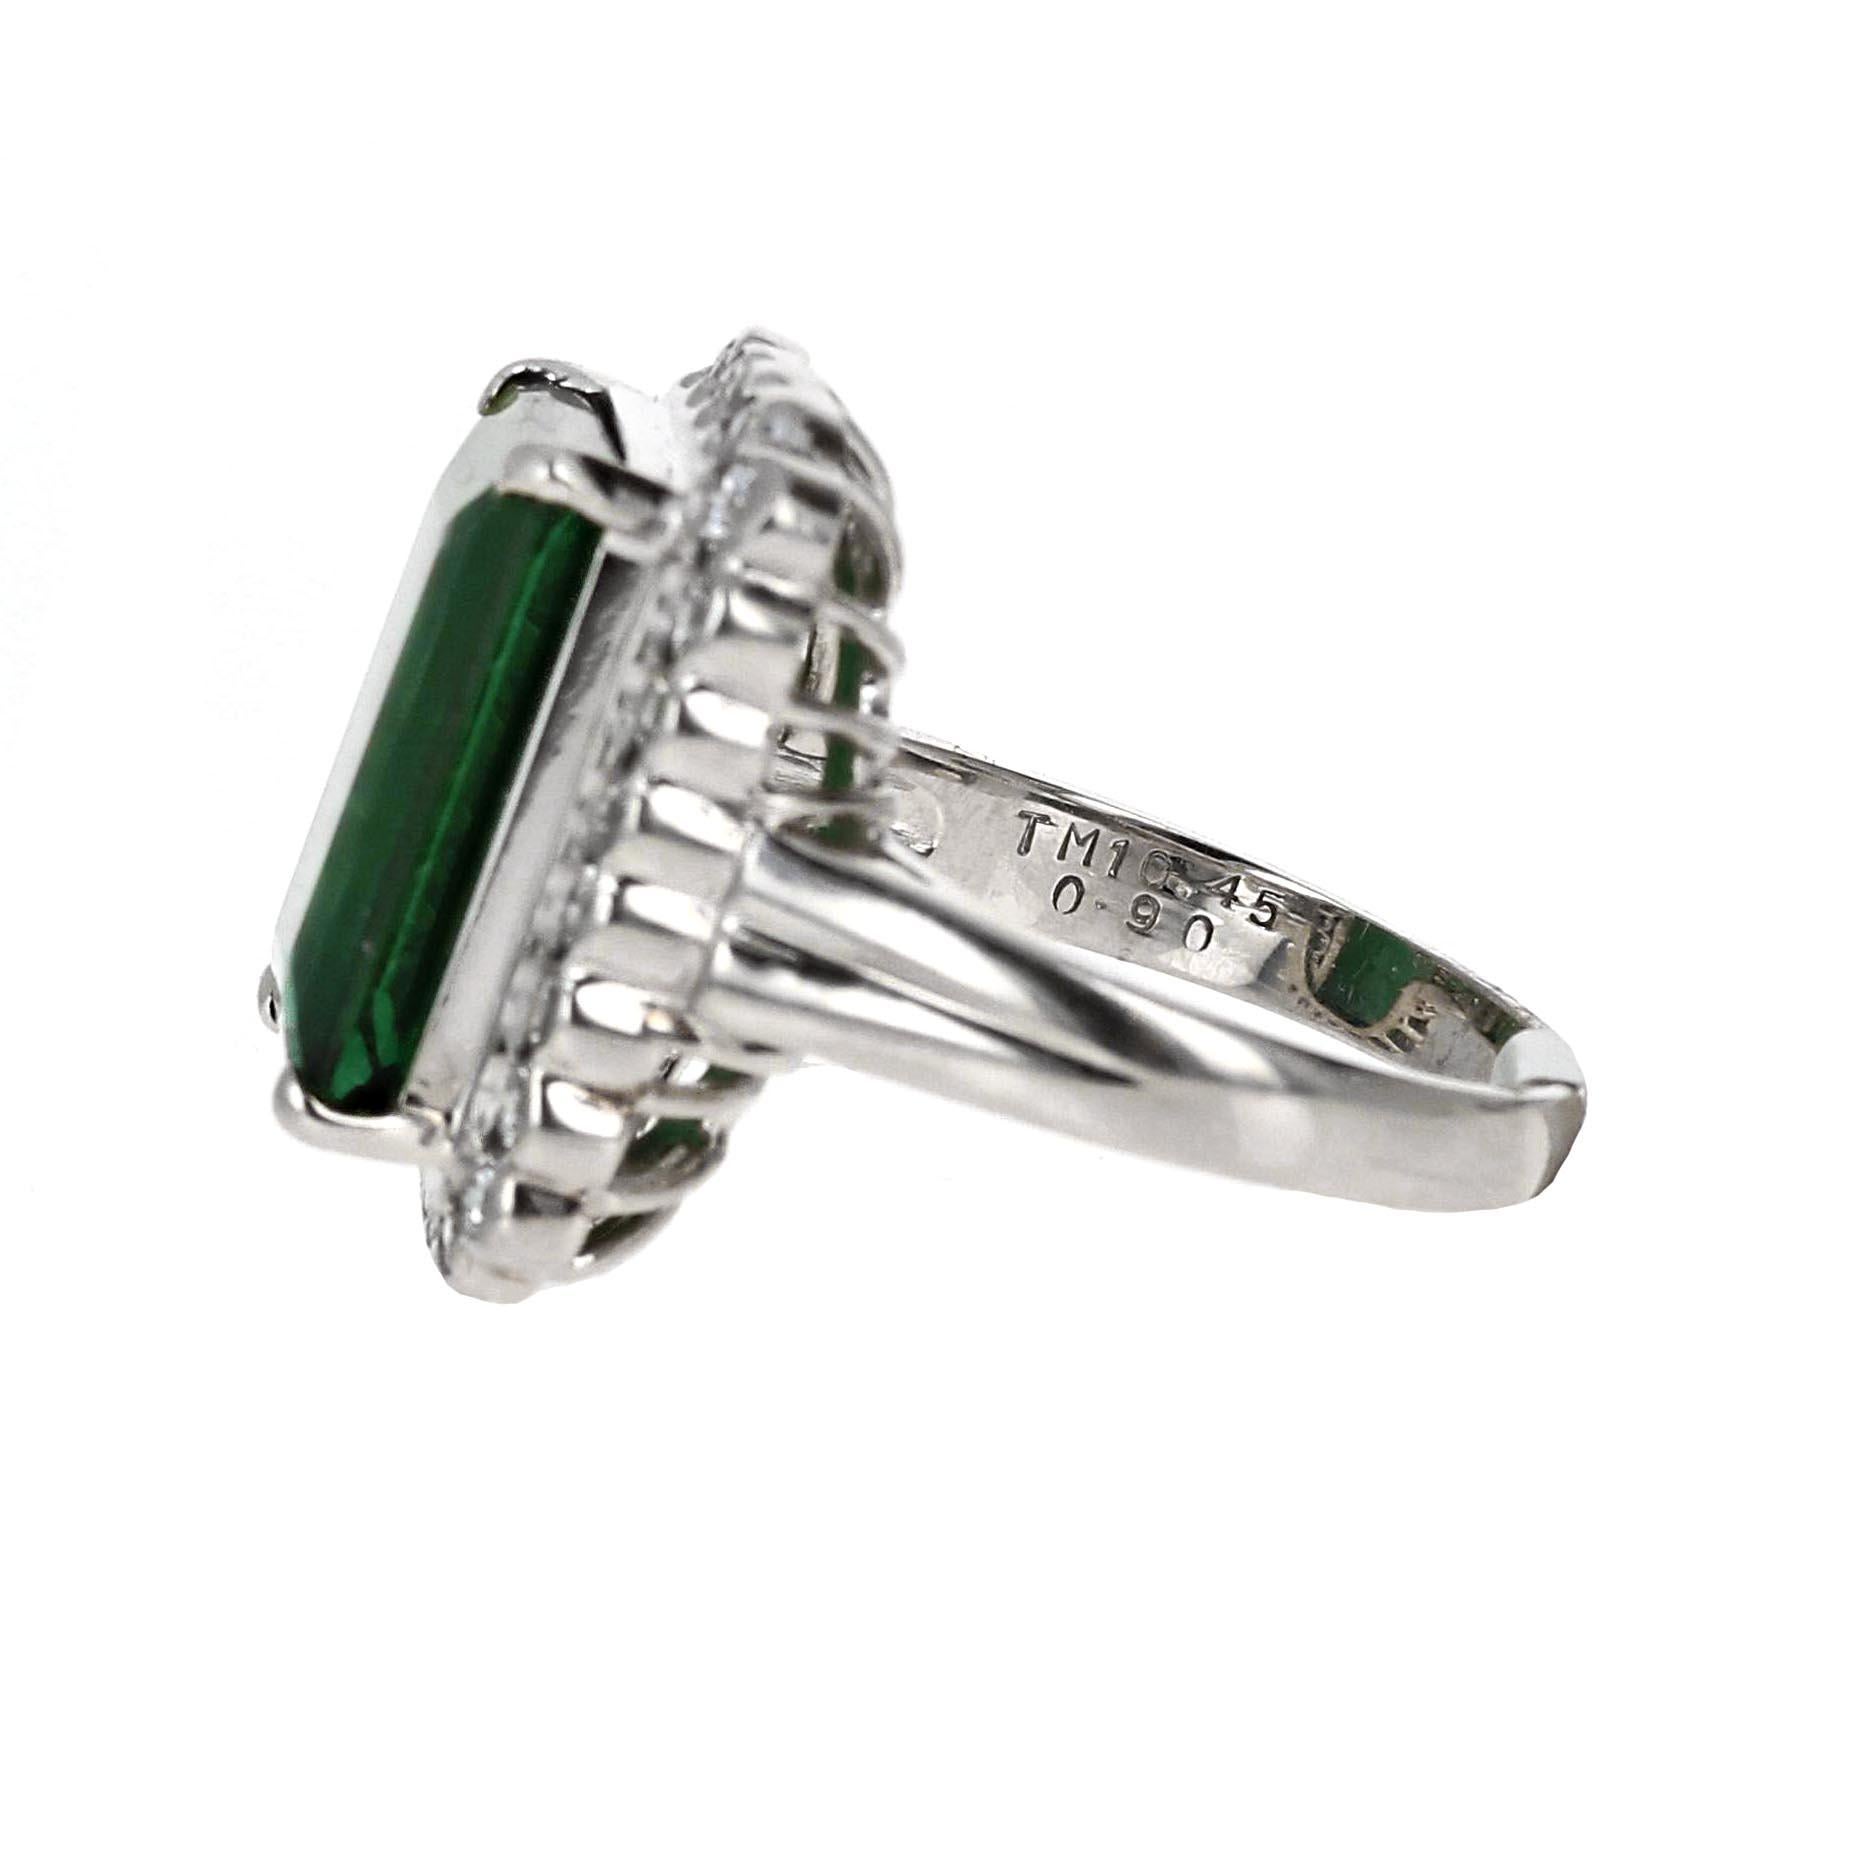 Platinum 10.45 carat Tourmaline emerald cut cocktail ring adorned with 0.90 carats of dazzling diamonds. This magnificent piece combines the allure of a rare and vibrant 10.45 carat Tourmaline gemstone, expertly cut into an elegant emerald shape,